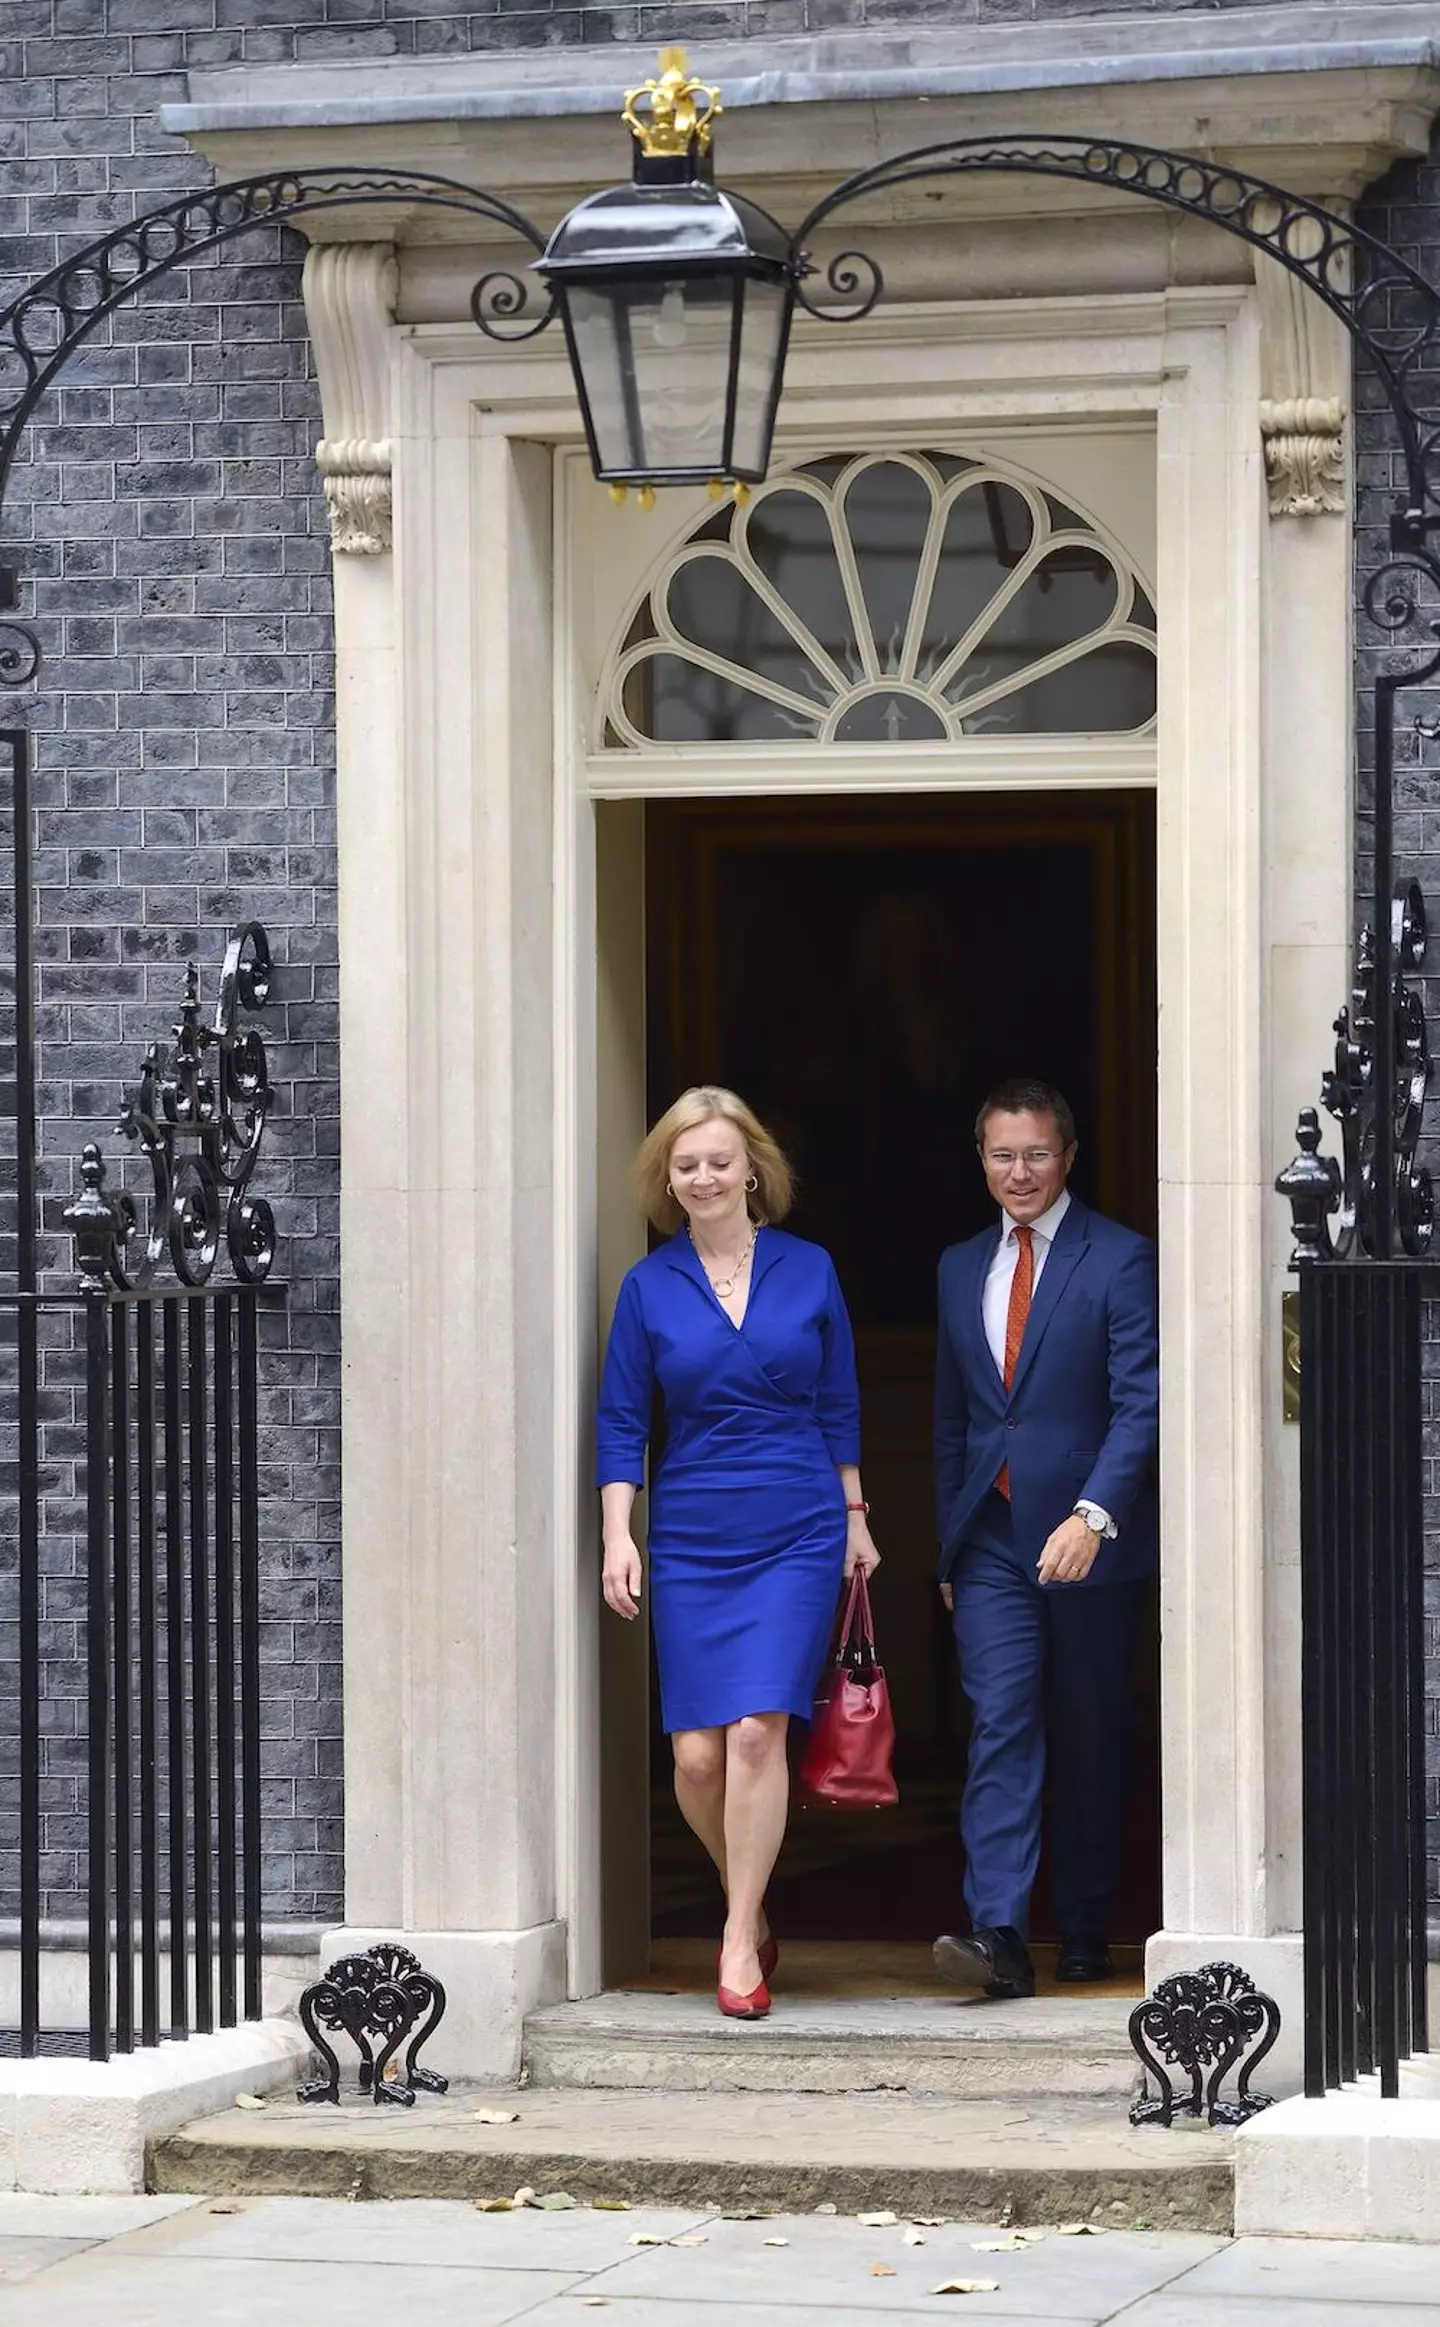 Liz Truss has been voted the new leader of the Conservative Party.